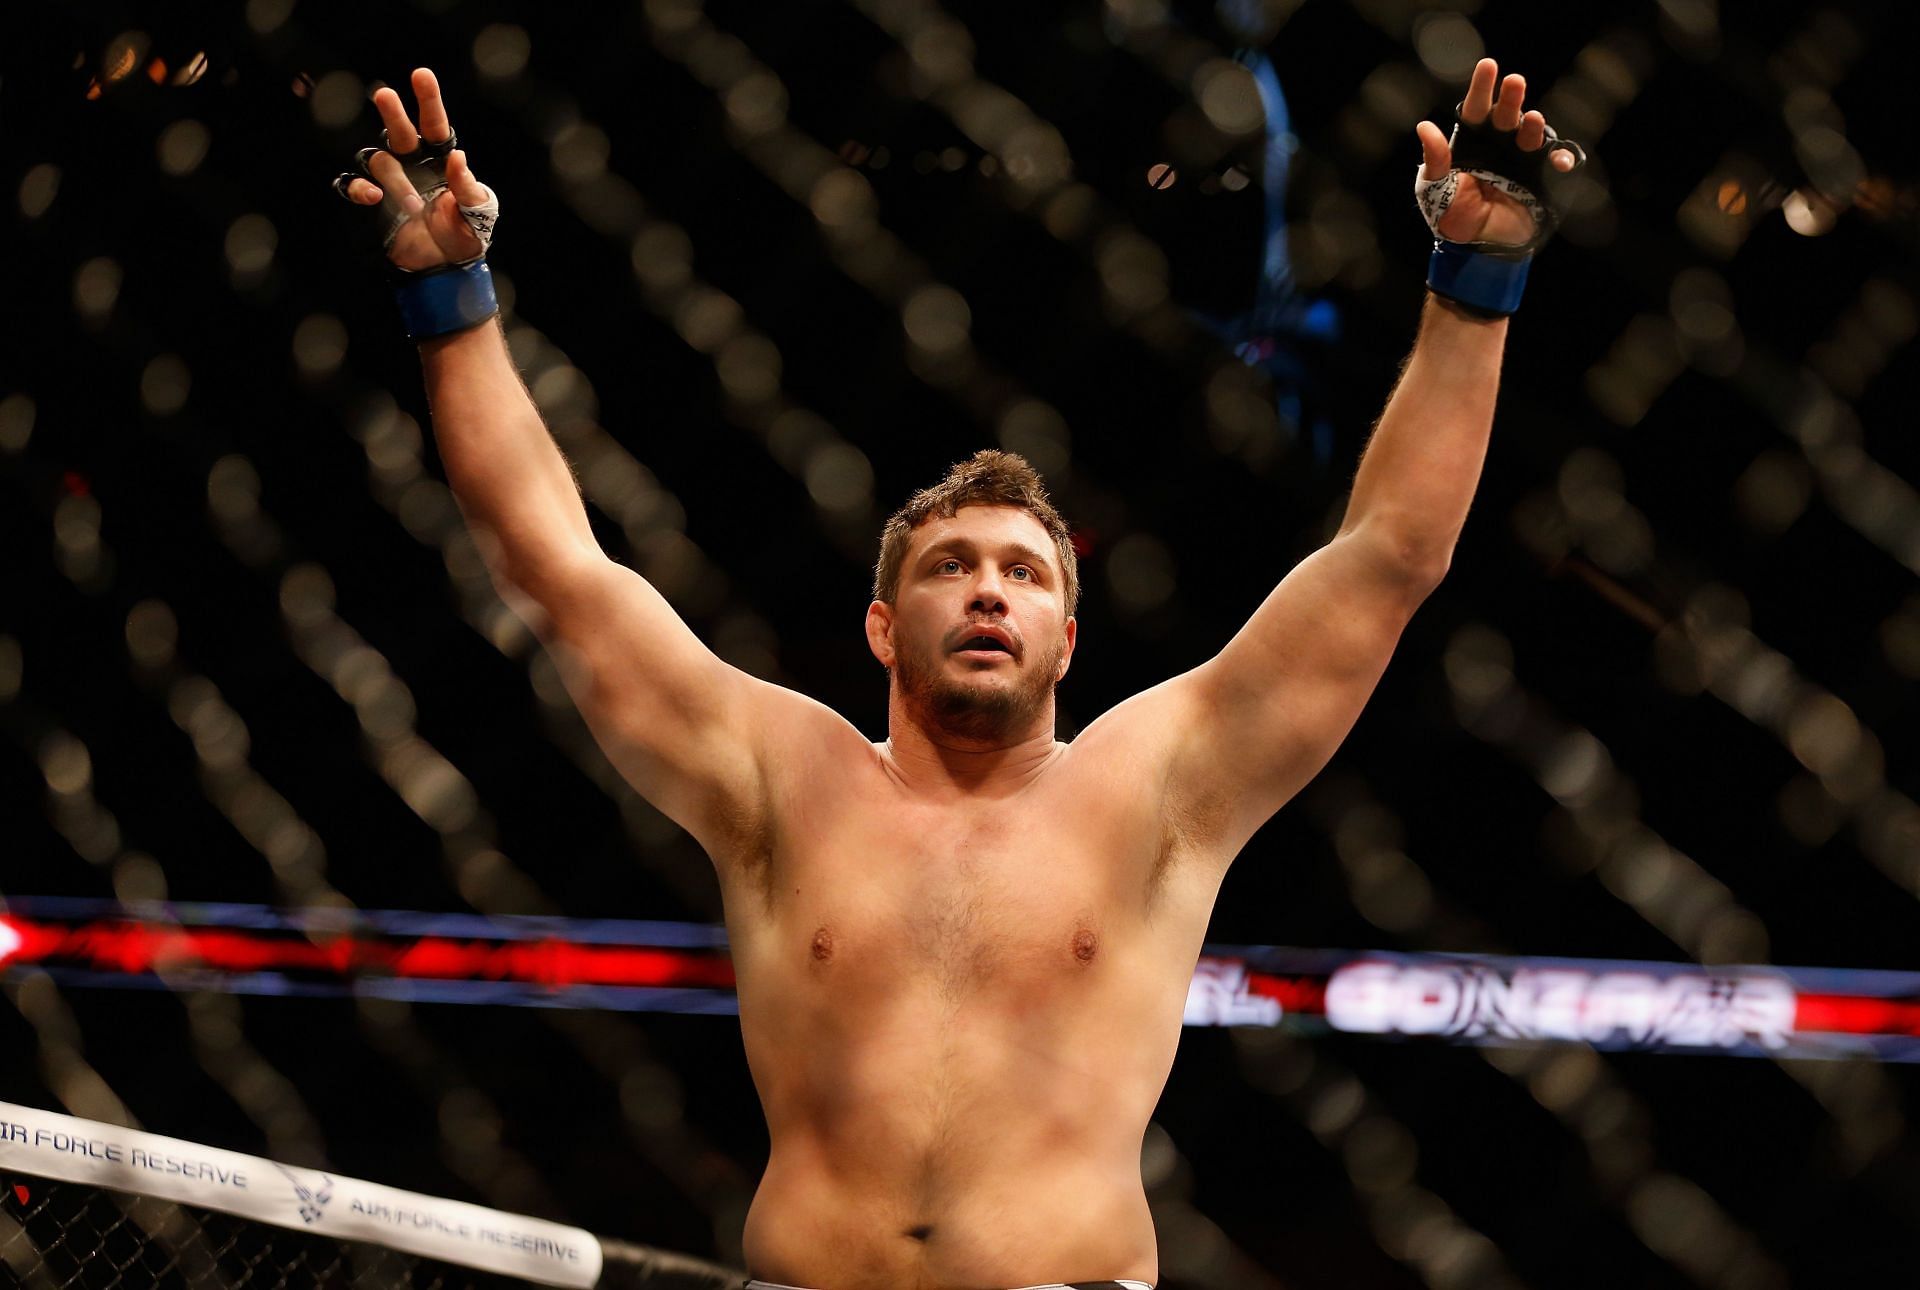 Matt Mitrione moved into MMA from the NFL in 2009